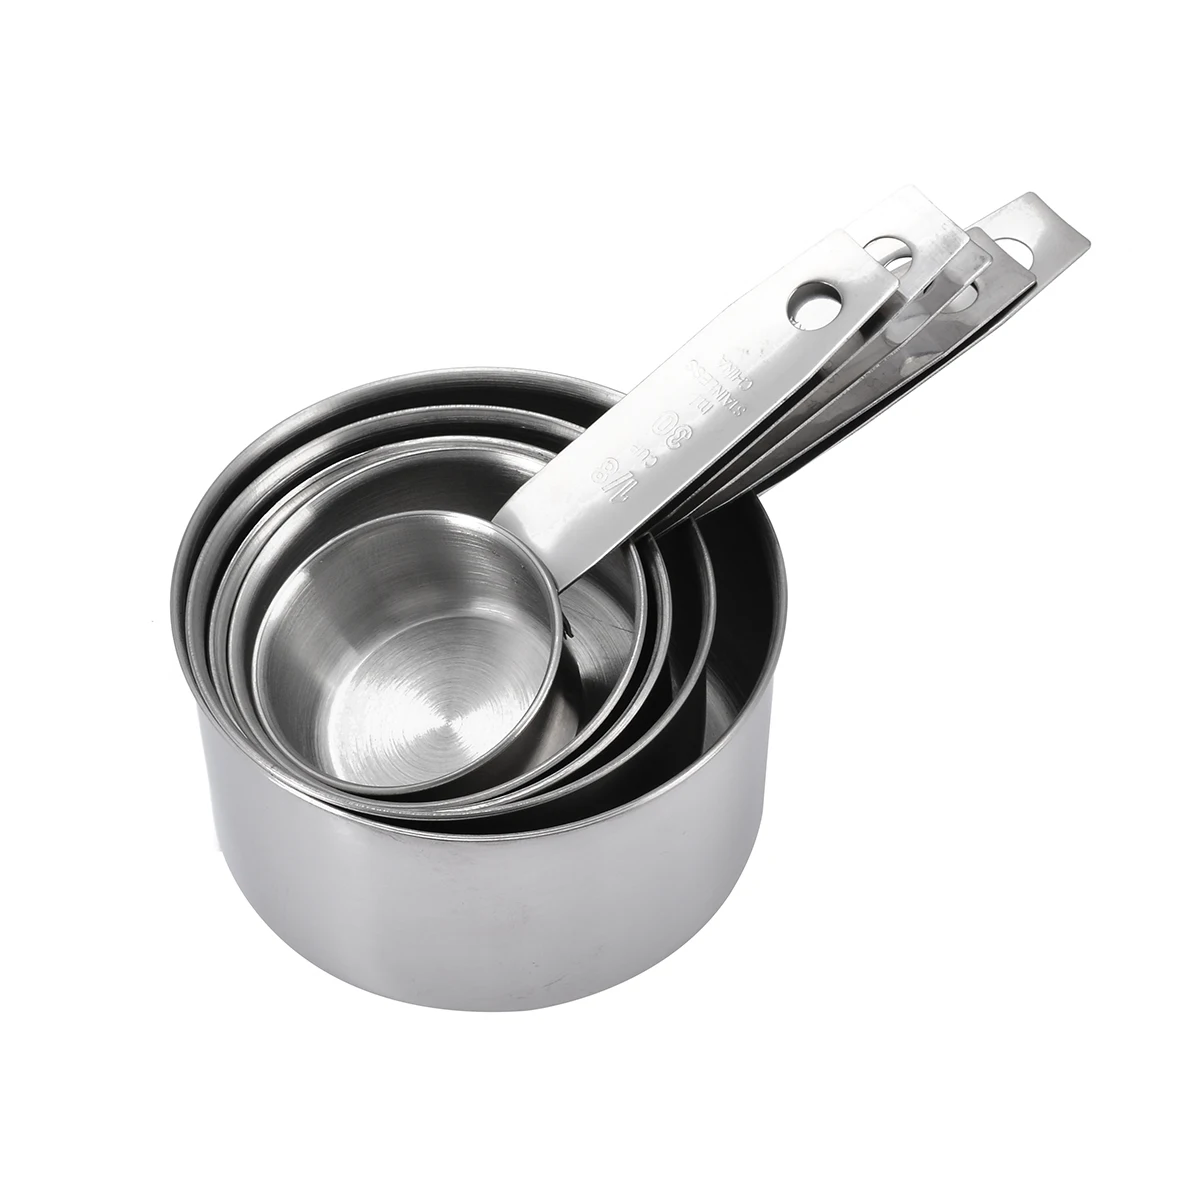 https://ae01.alicdn.com/kf/H7adc9d24c5f748759e09a4c14b2d4899N/5pcs-Baking-Measuring-Cups-Spoons-Kit-Stainless-Steel-Flour-Liquid-Measuring-Spoons-Kitchen-Baking-Cooking-Scaled.jpg